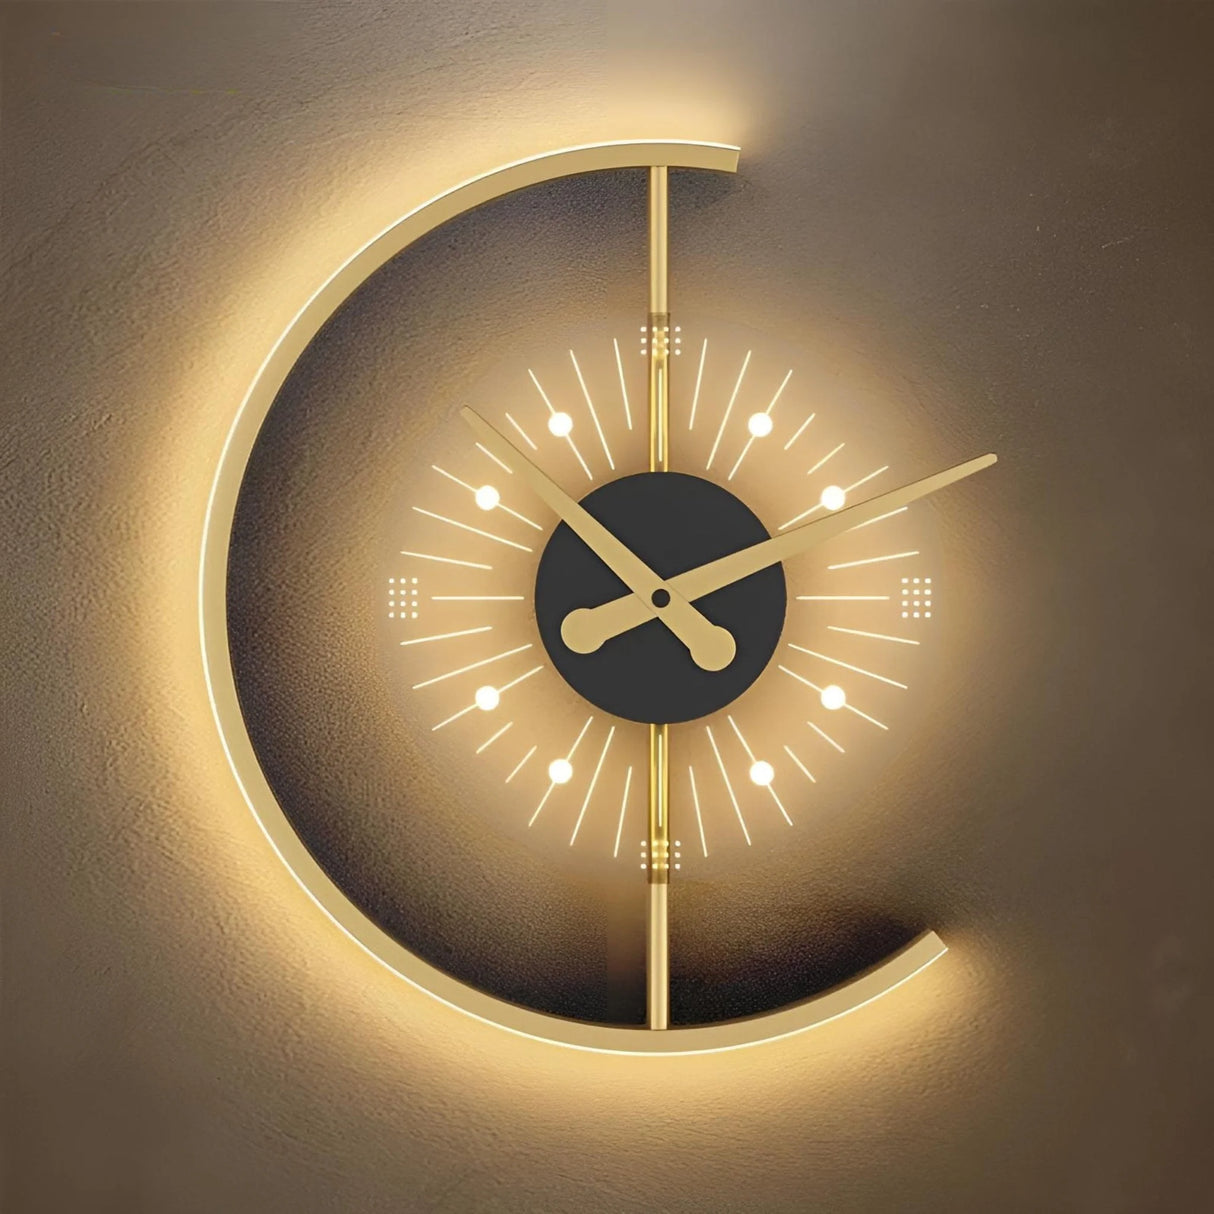 LED Wall Lamp with Clock - Illuminate Your Space in Style